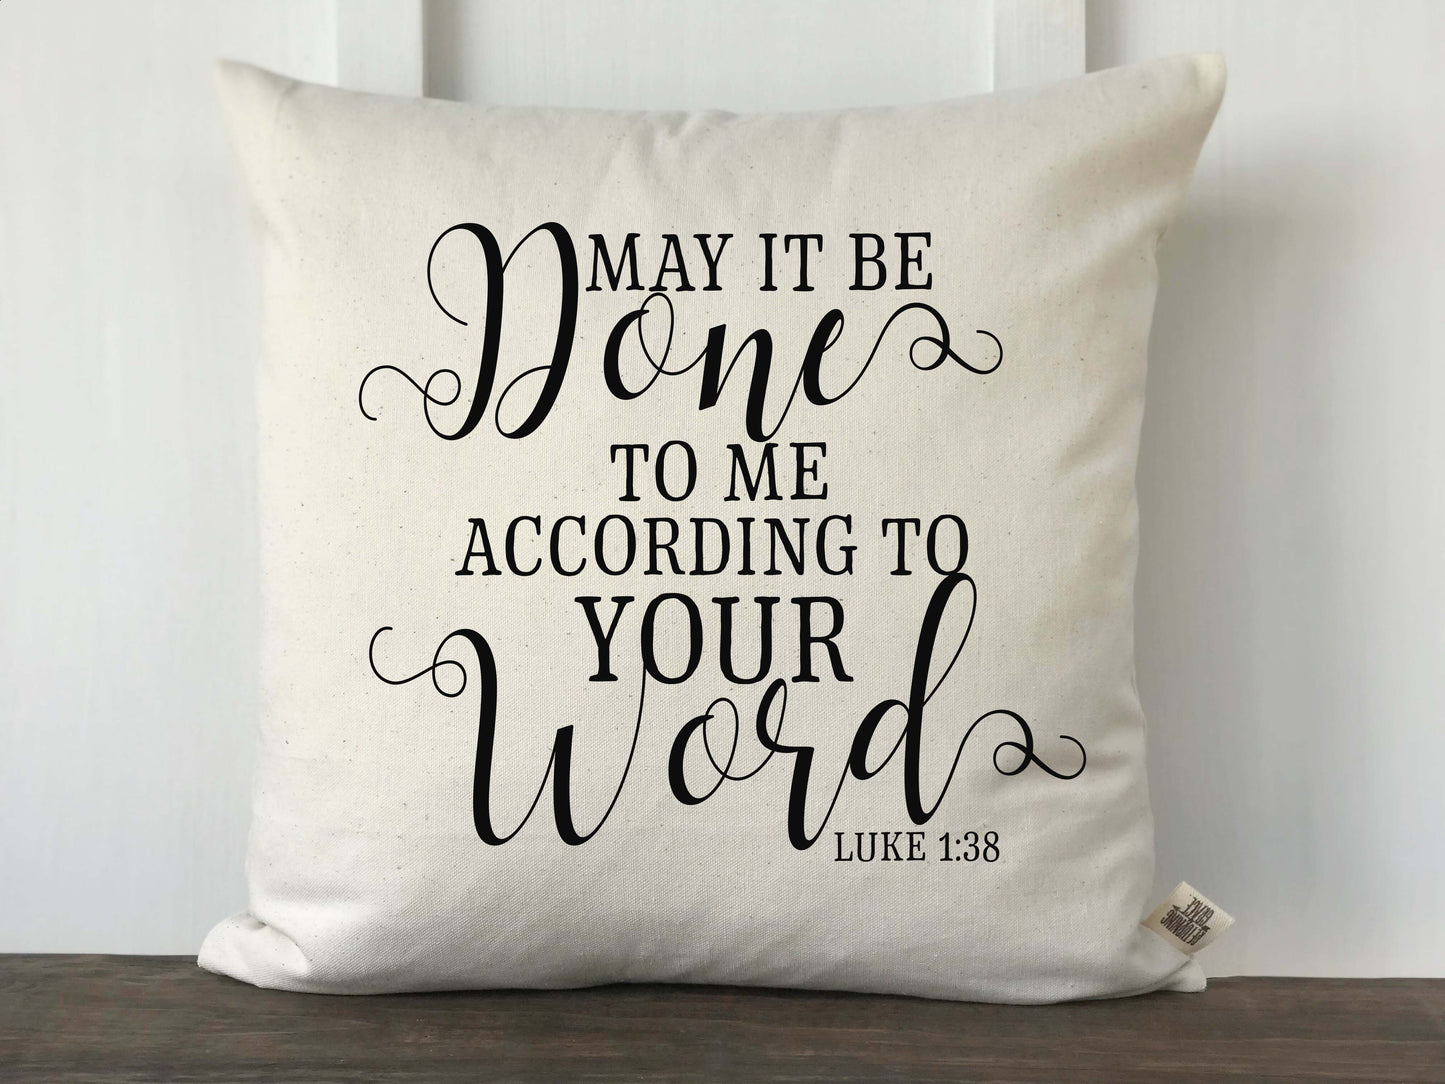 May It Be Done To Me According to Your Word Luke 1:38 Scripture Pillow Cover - Returning Grace Designs